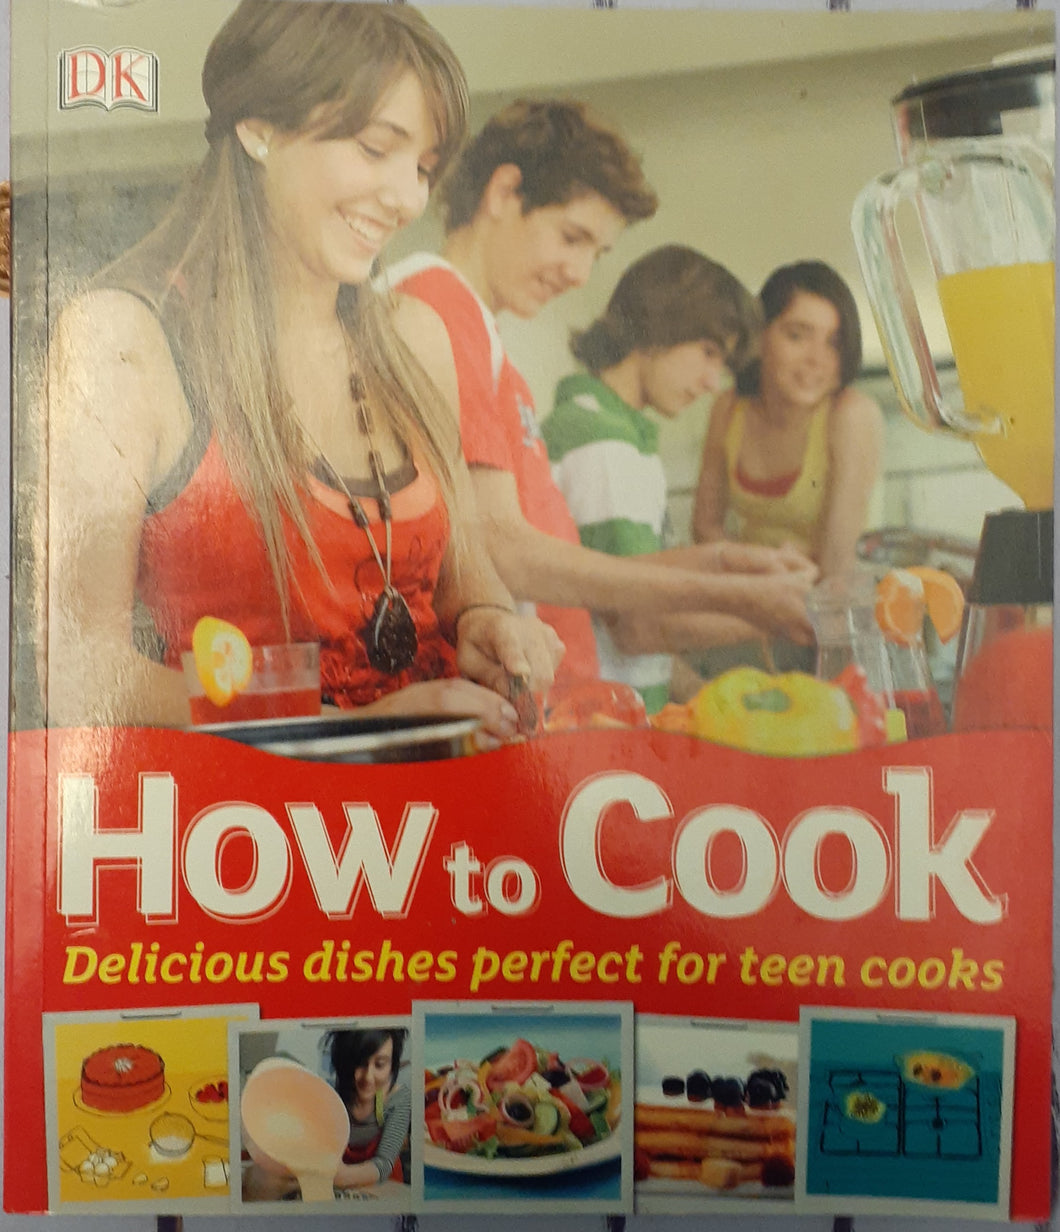 How to Cook - Delicious Dishes Perfect for Teen Cooks